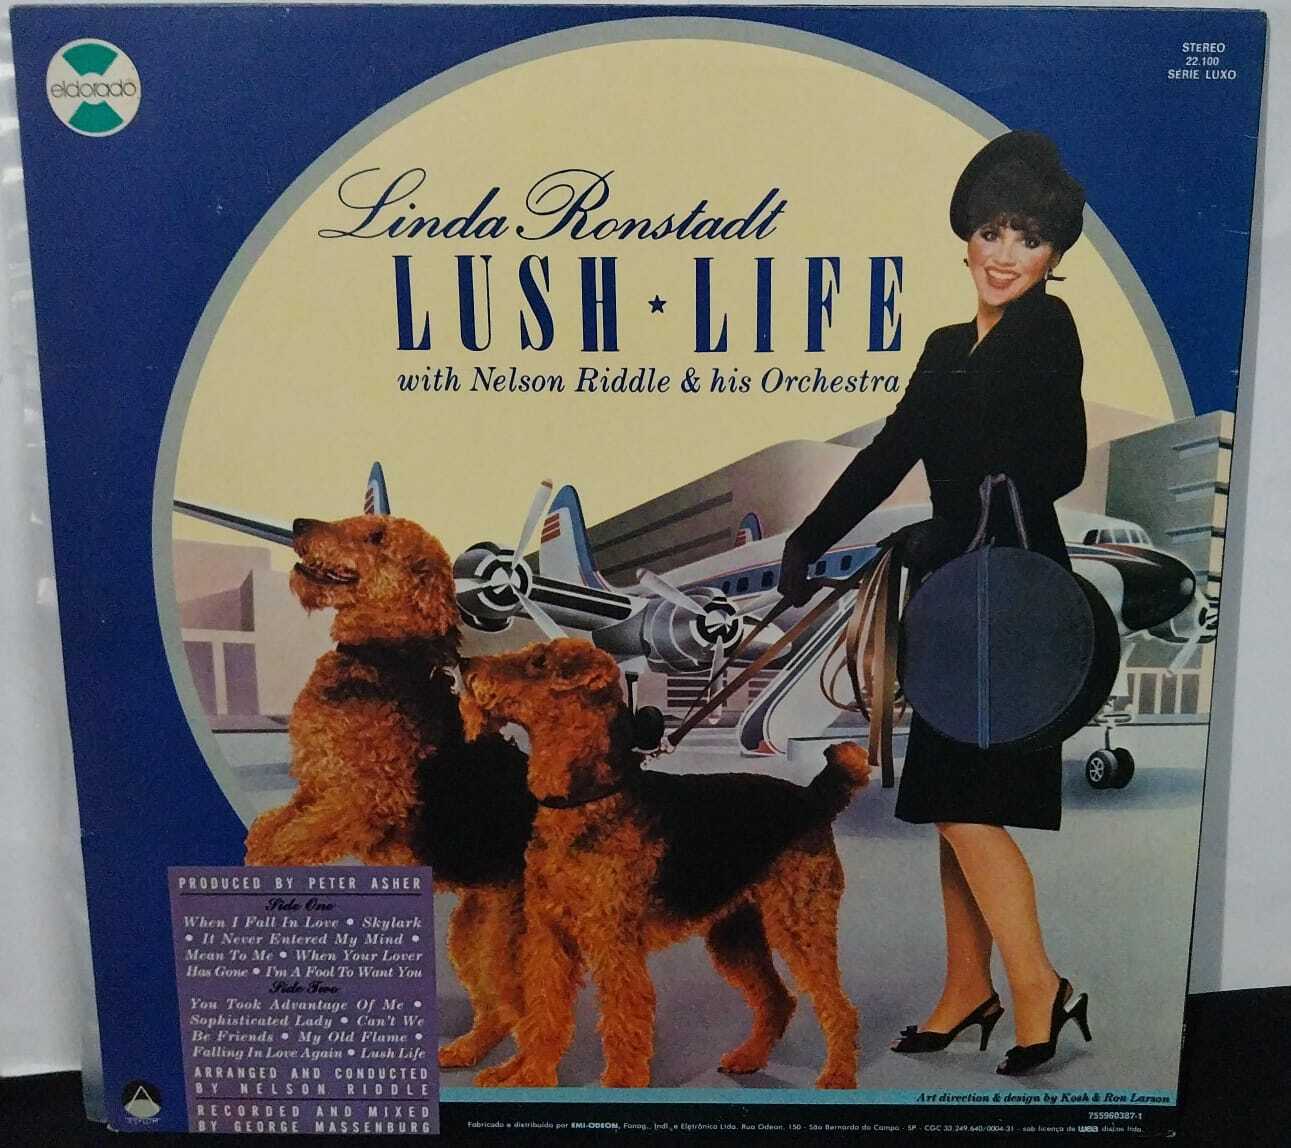 Vinil - Linda Ronstadt with Nelson Riddle and His Orchestra - Lush Life